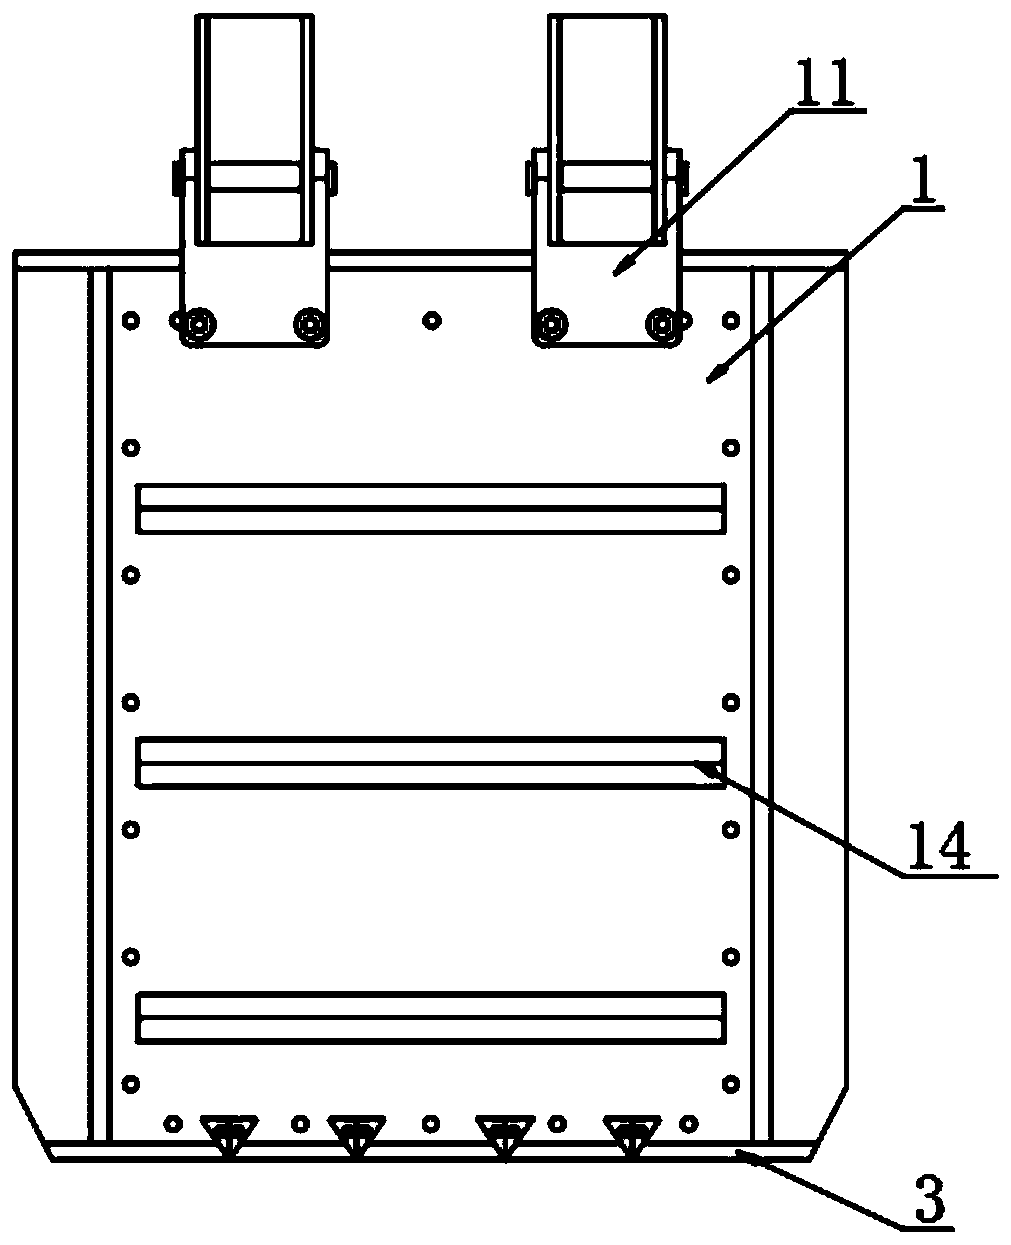 Anti-silting structure of plate brake